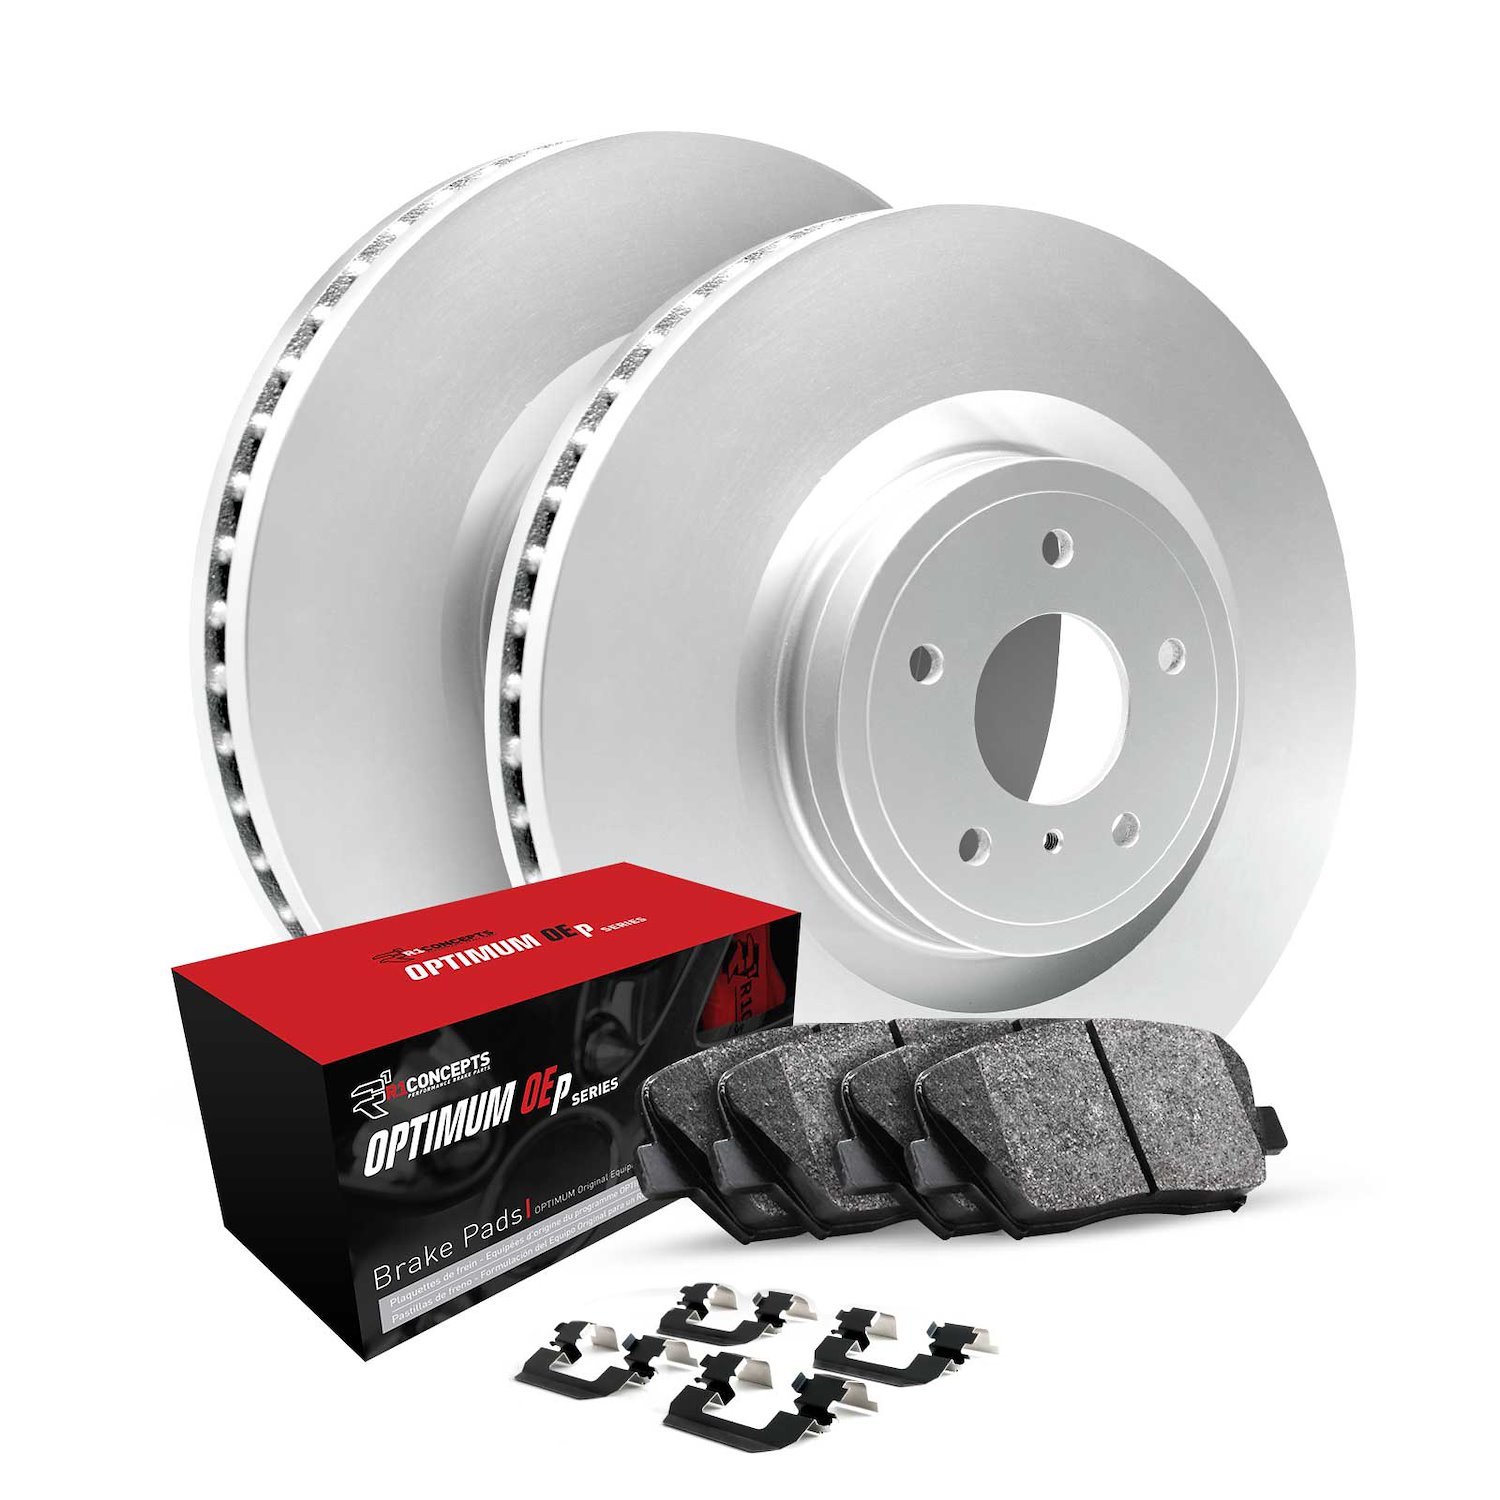 GEO-Carbon Brake Rotor Set w/Optimum OE Pads & Hardware, Fits Select Fits Multiple Makes/Models, Position: Rear